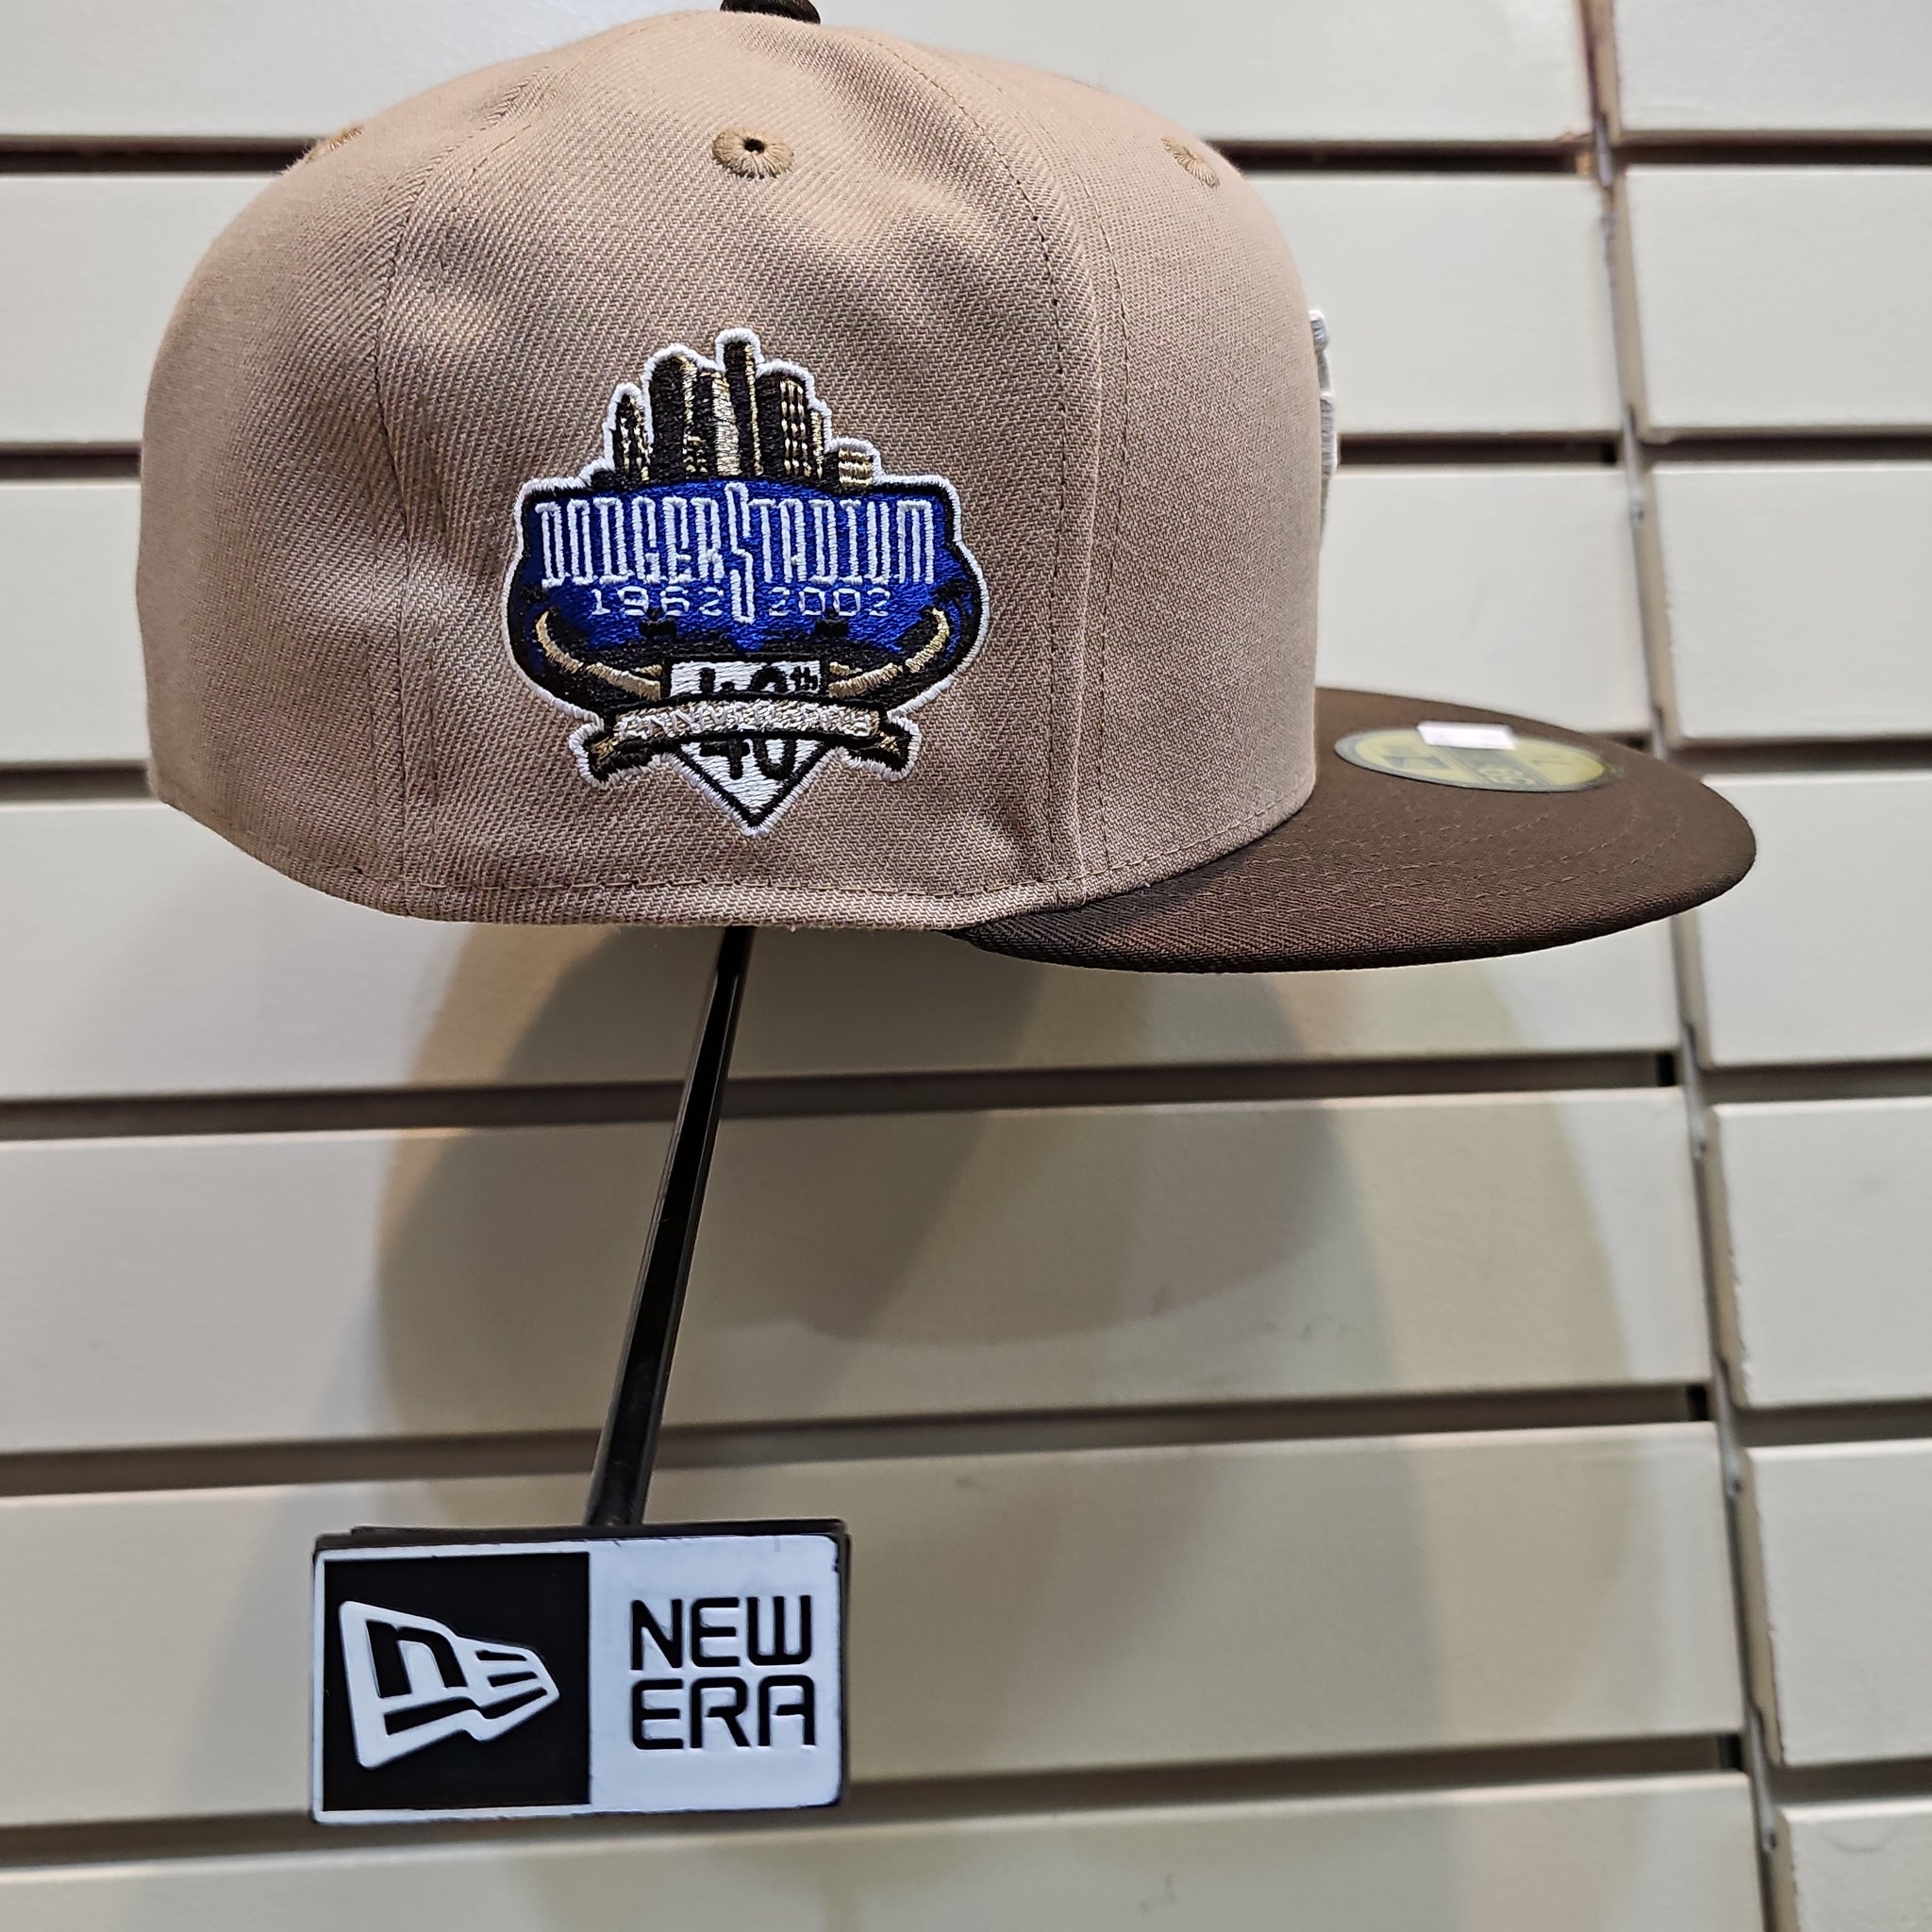 New 59Fifty Upsidedown LA hats by @neweracap @dodgers just arrived